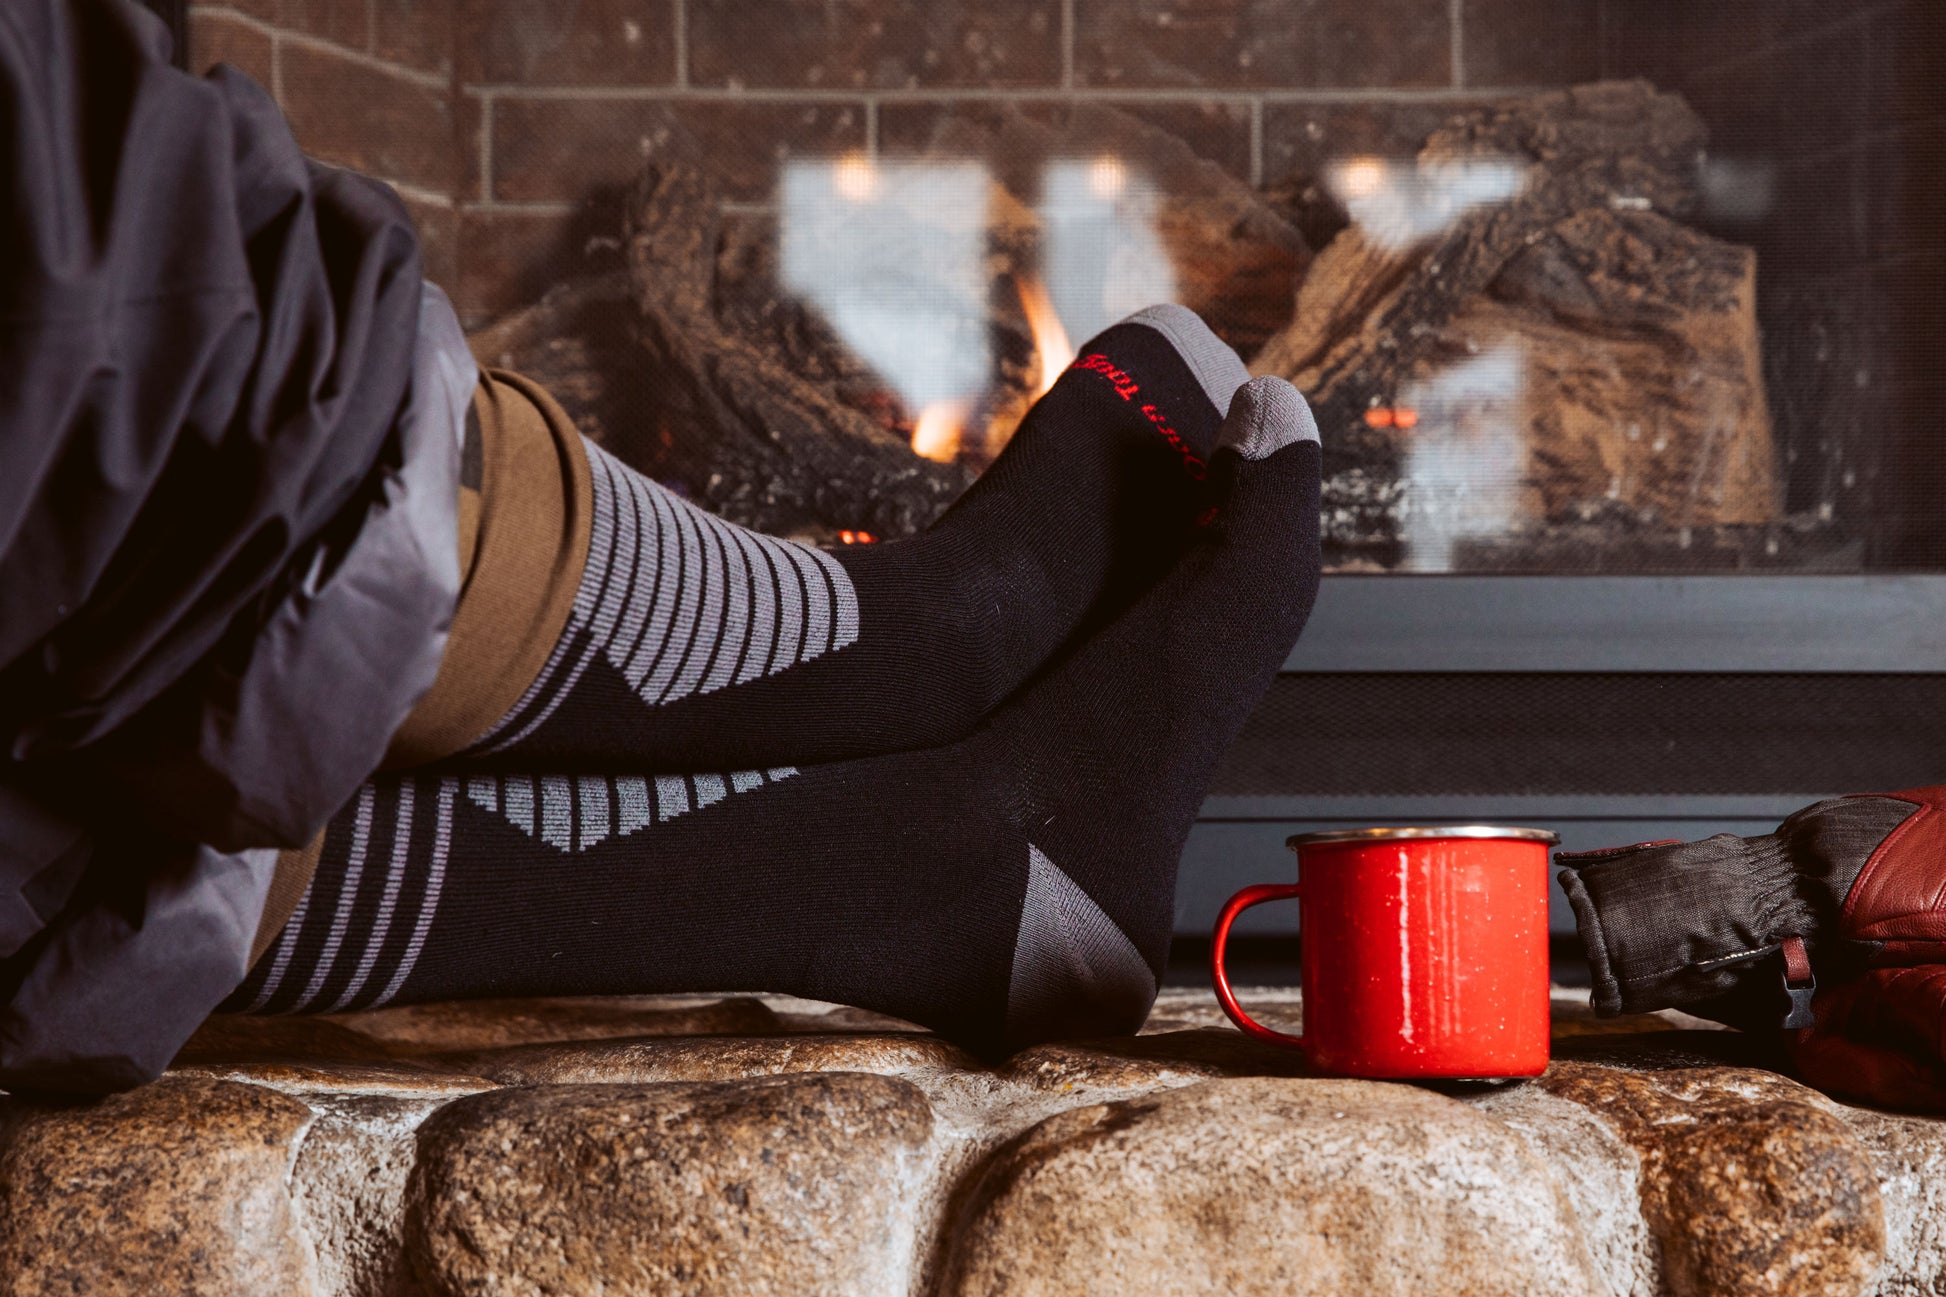 Darn Tough Men's Black Thermolite Edge Over-the-Calf Midweight Ski & Snowboard Sock on model by fireplace